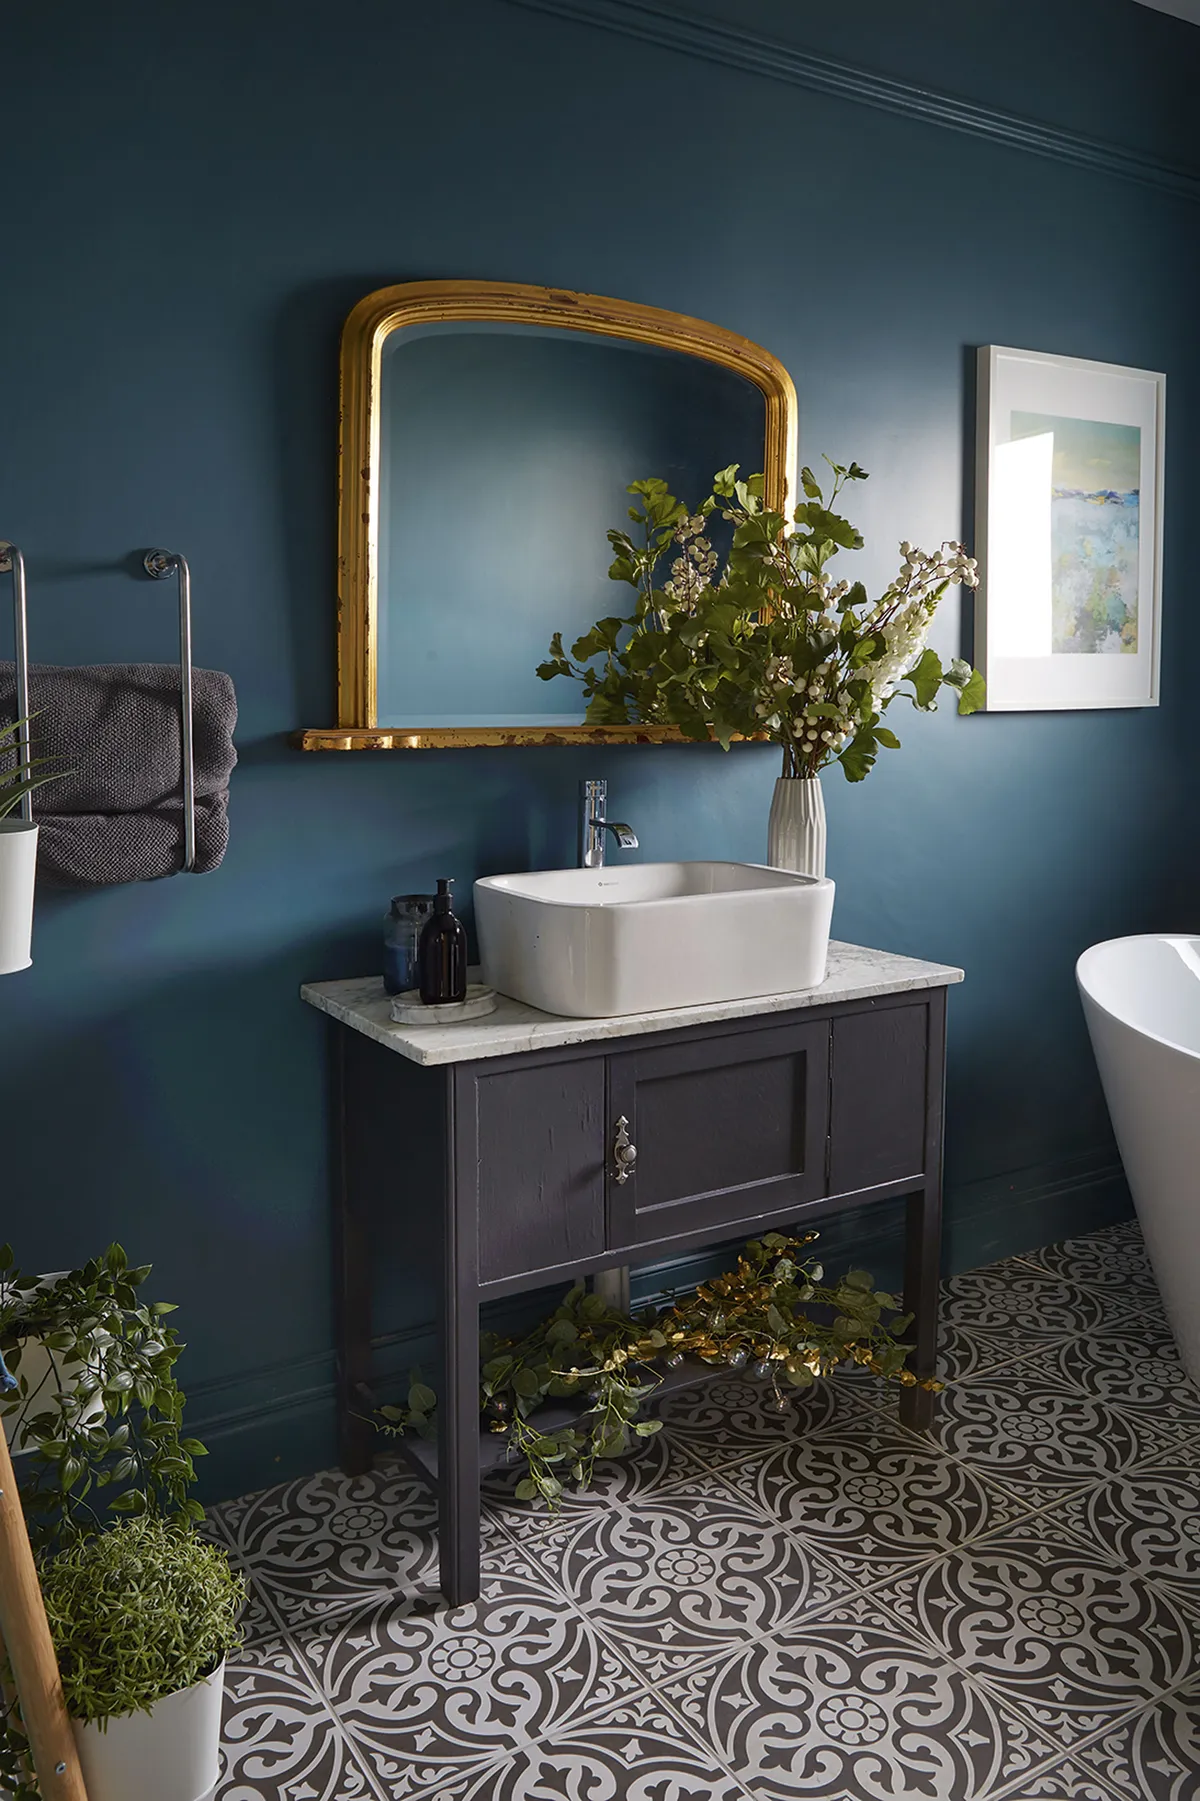 Painting the walls a sumptuous teal and adding a revamped vanity unit gave Gillian’s bathroom a luxury spa feel within her budget